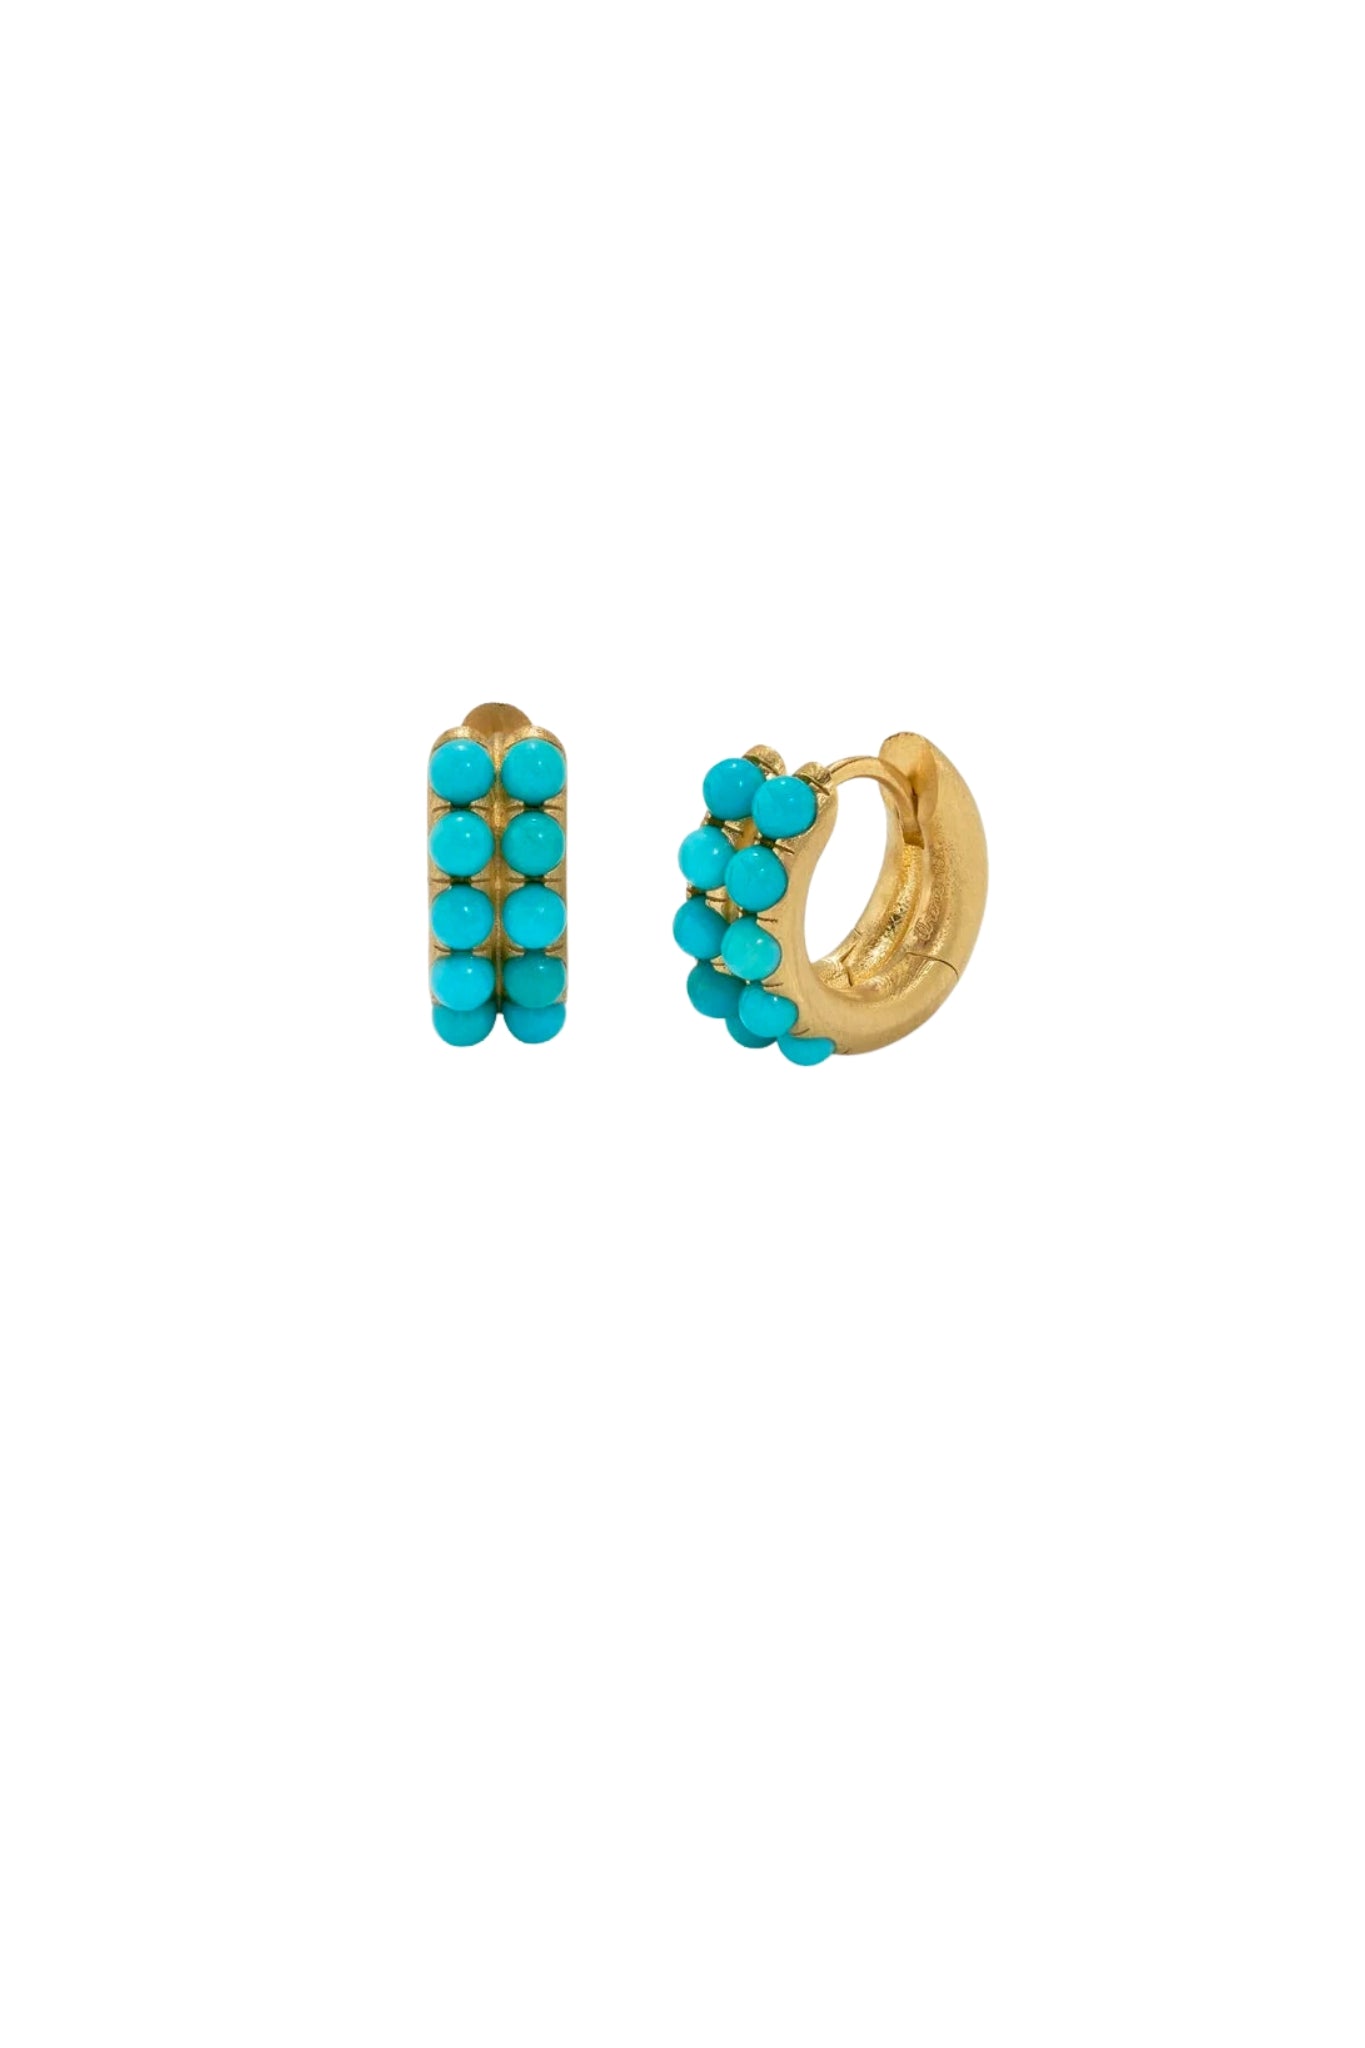 Irene Neuwirth 18k Yellow Gold 8mm Huggies set with Double Row of 2mm Turquoise